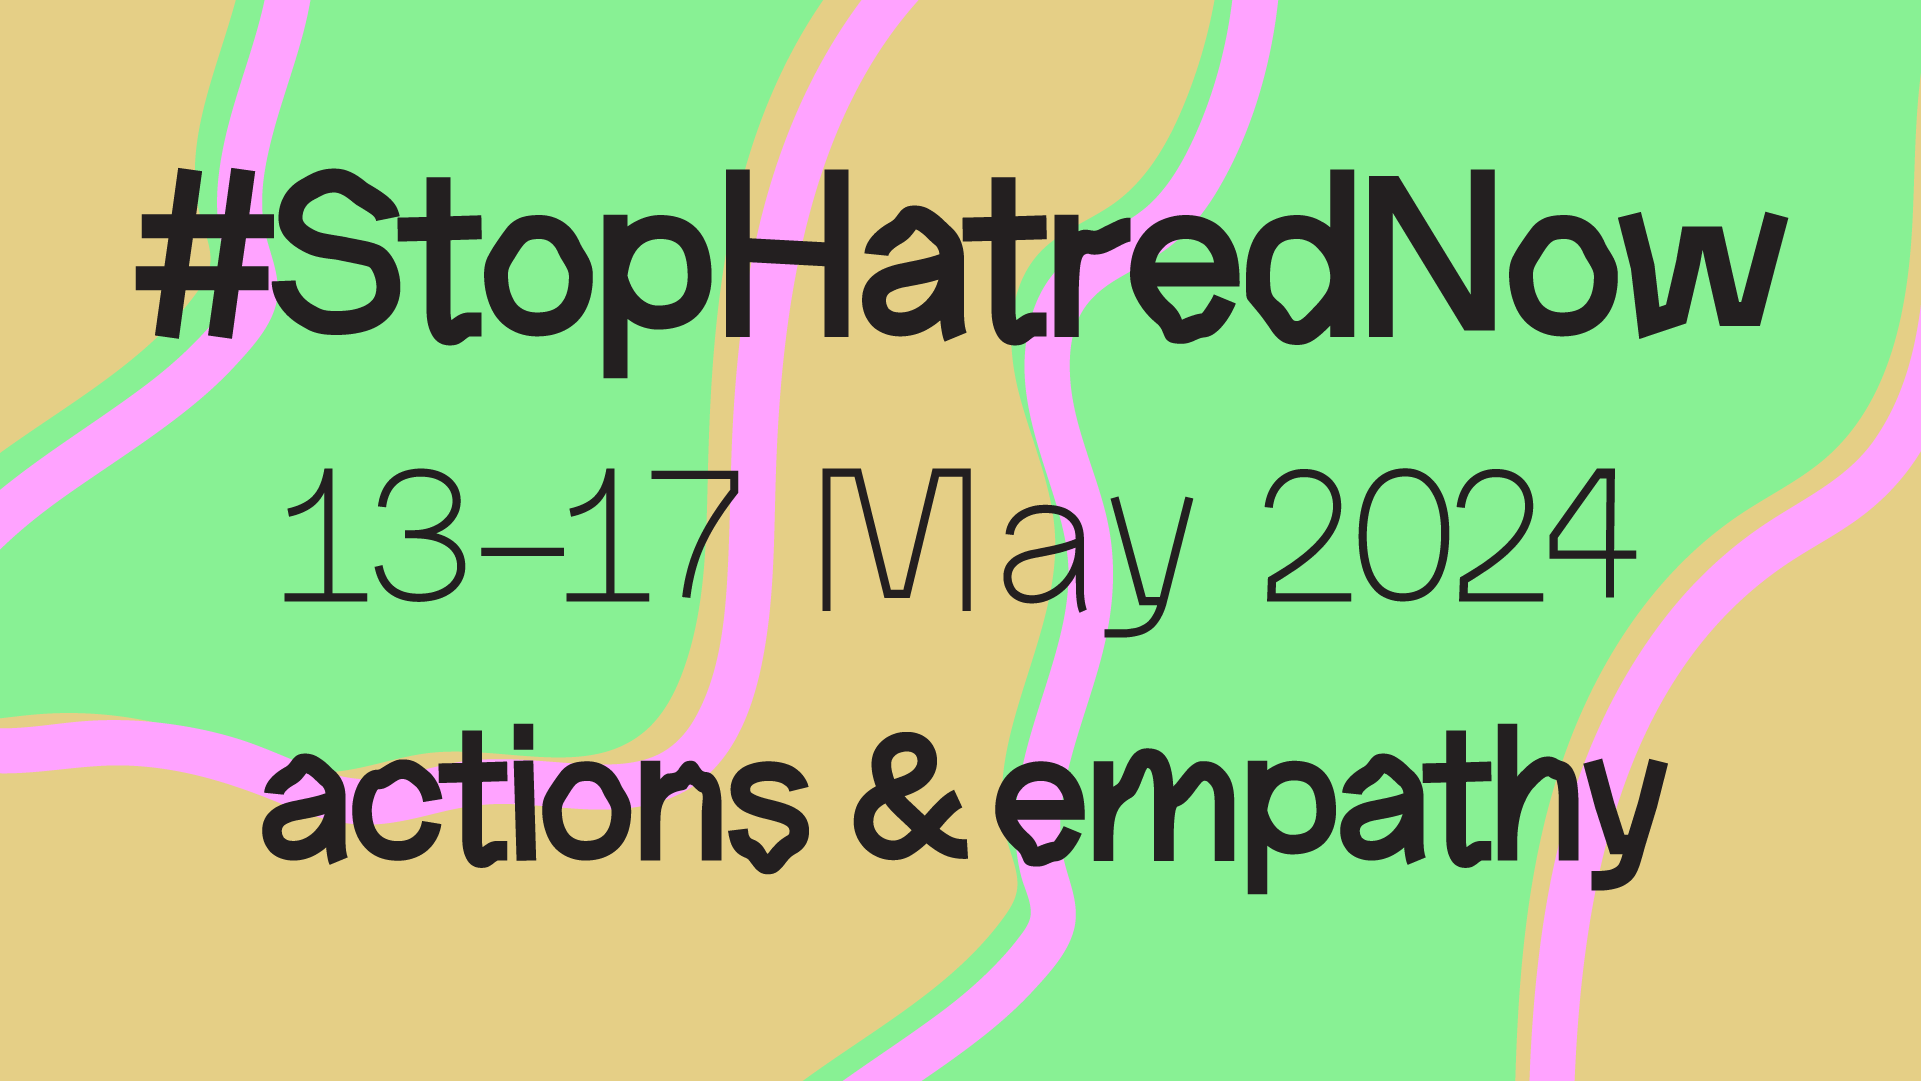 Text on colorful background: #StopHatredNow 13-17 May 2024 actions & empathy